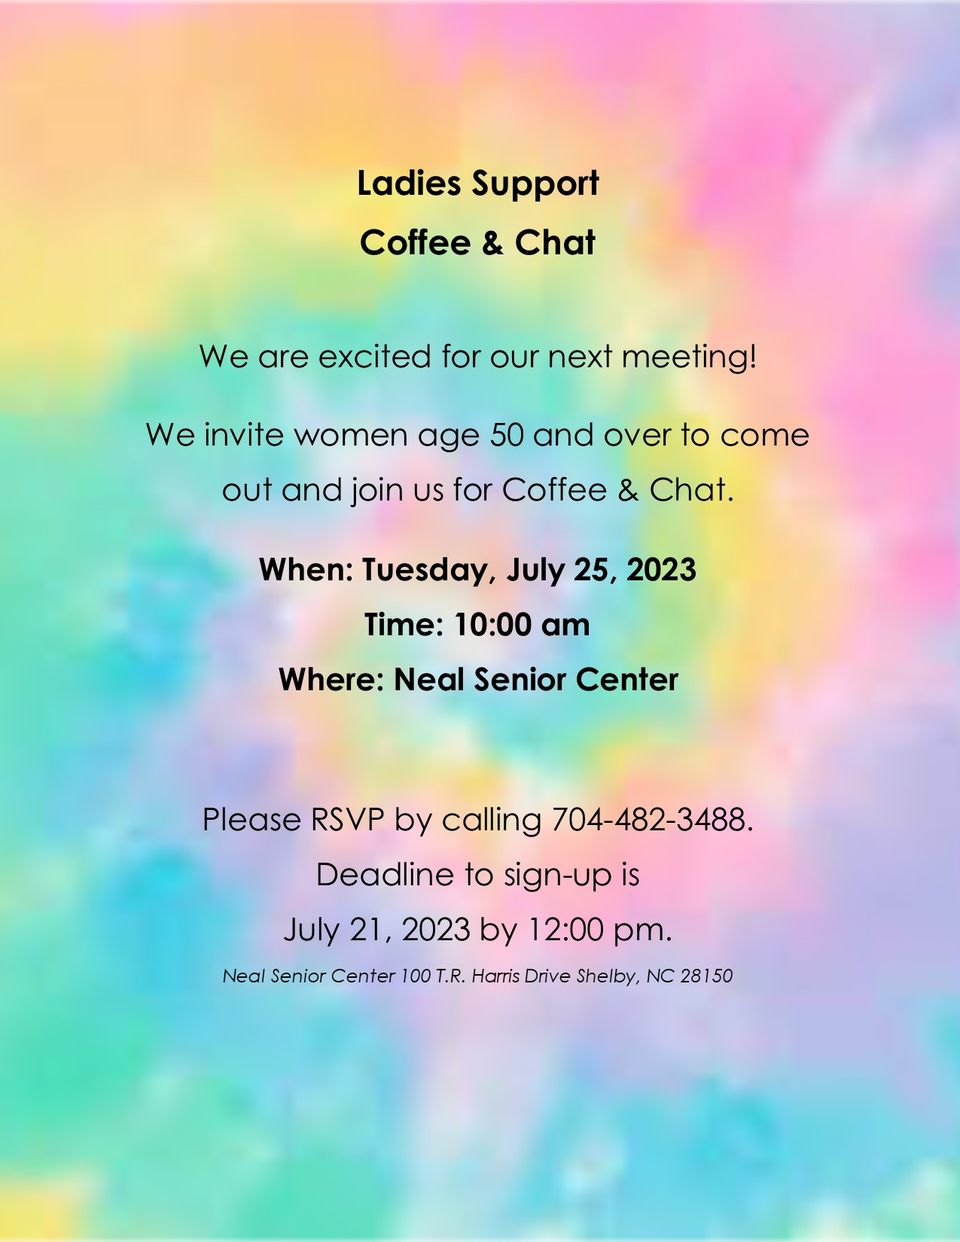 Ladies support coffee   chat july 25  2023